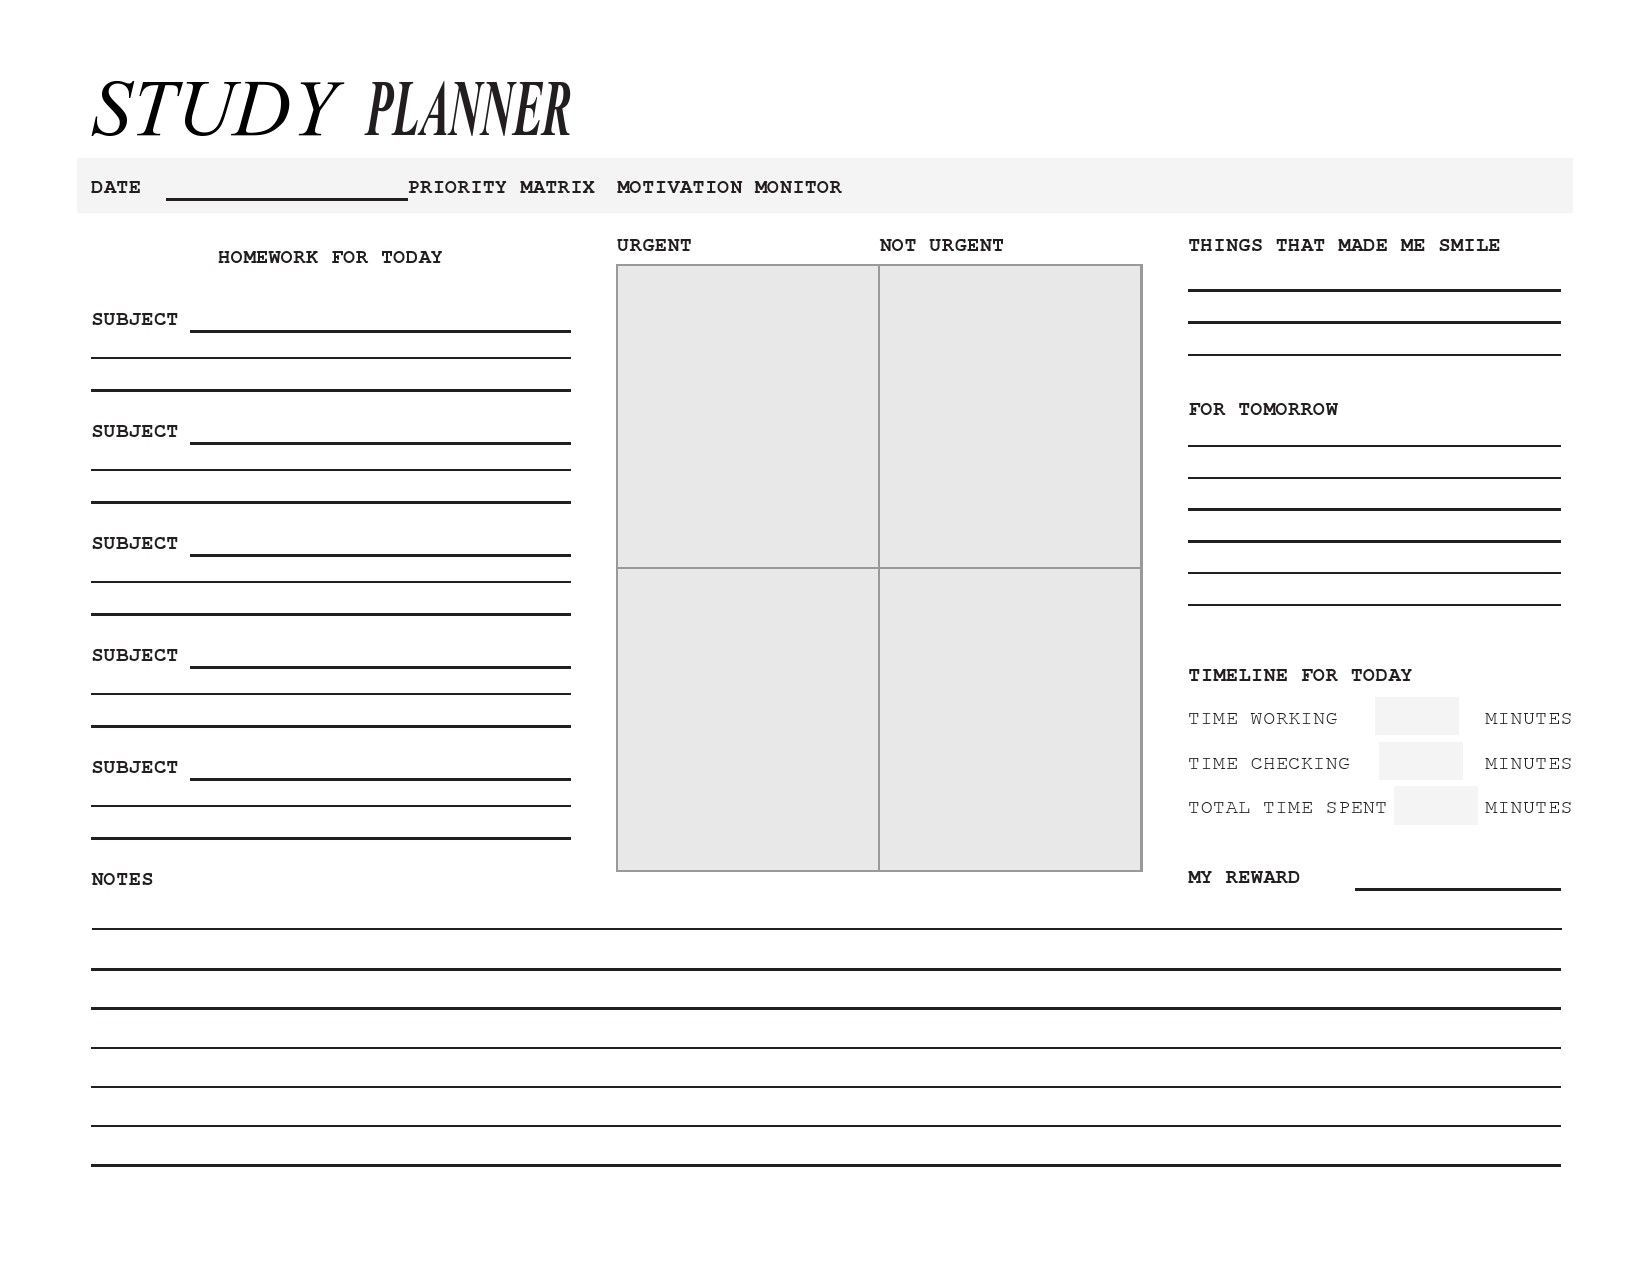 Free time study template 24